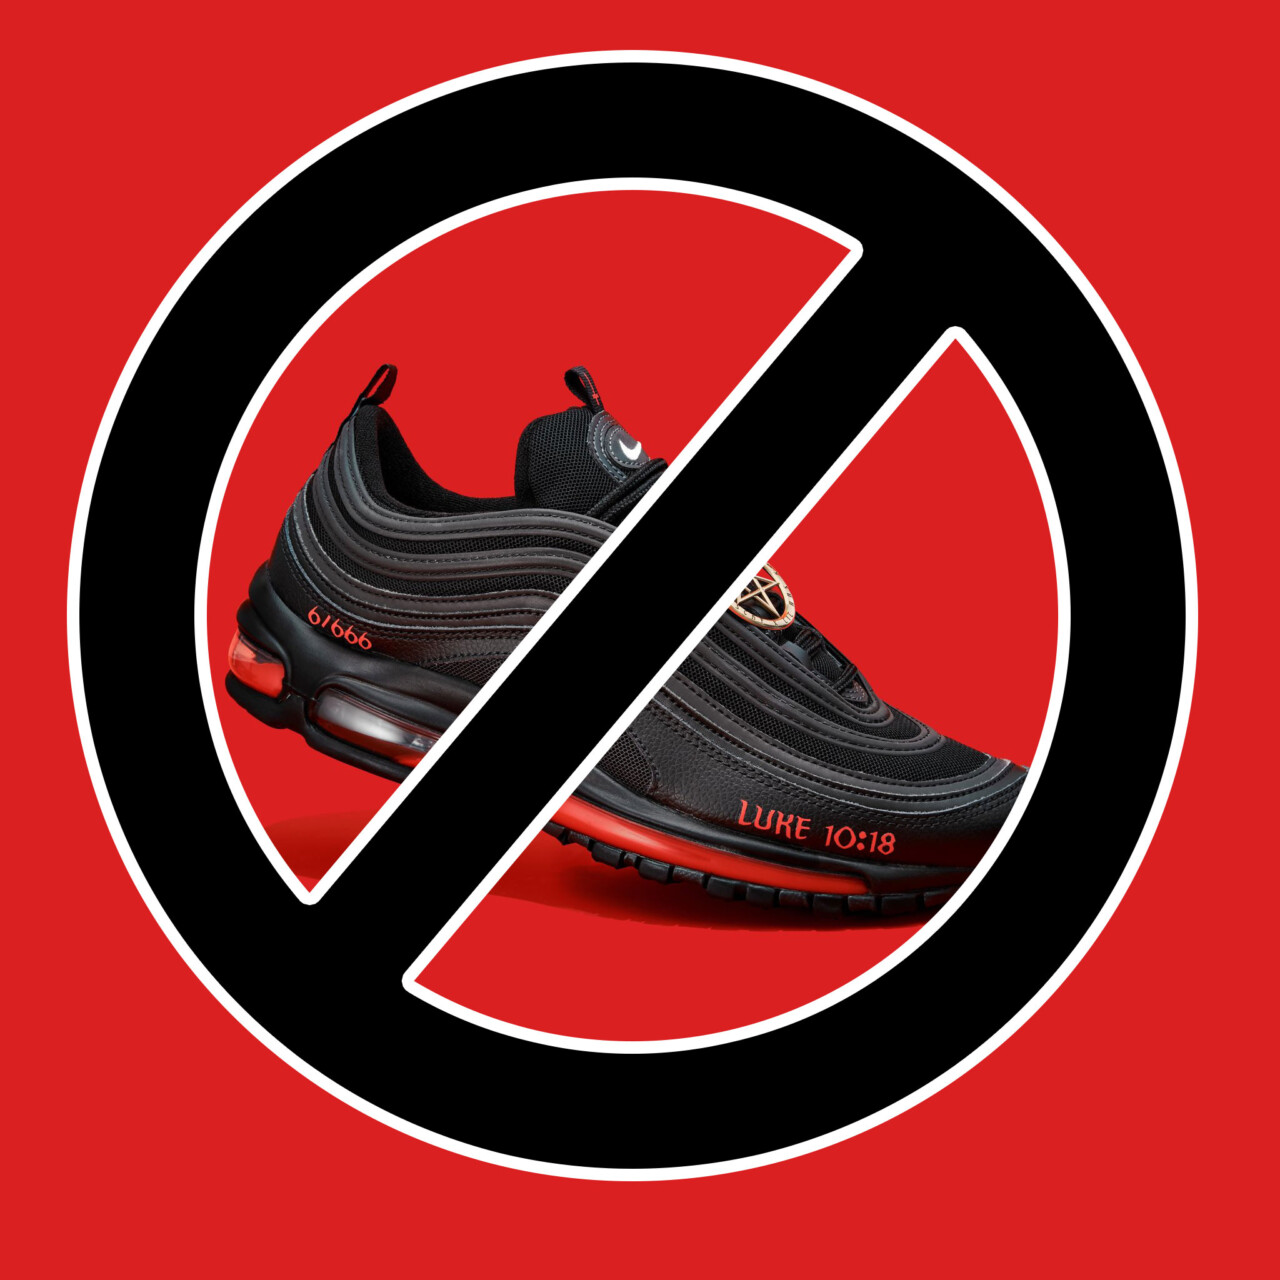 Stop the Promotion of Satan Shoes Containing Human Blood